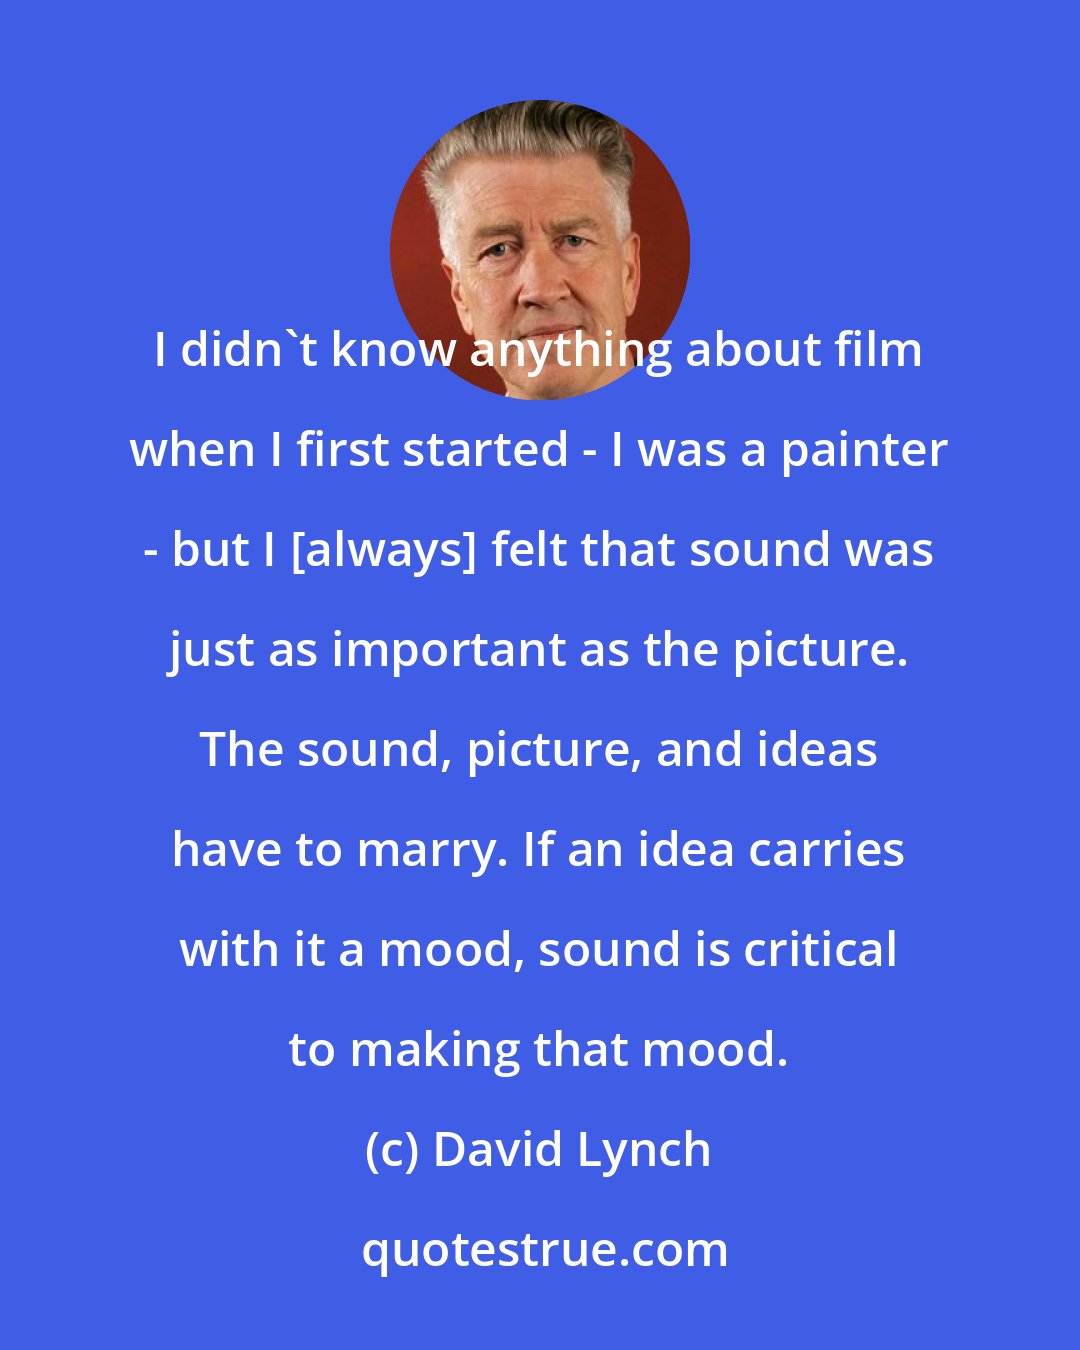 David Lynch: I didn't know anything about film when I first started - I was a painter - but I [always] felt that sound was just as important as the picture. The sound, picture, and ideas have to marry. If an idea carries with it a mood, sound is critical to making that mood.